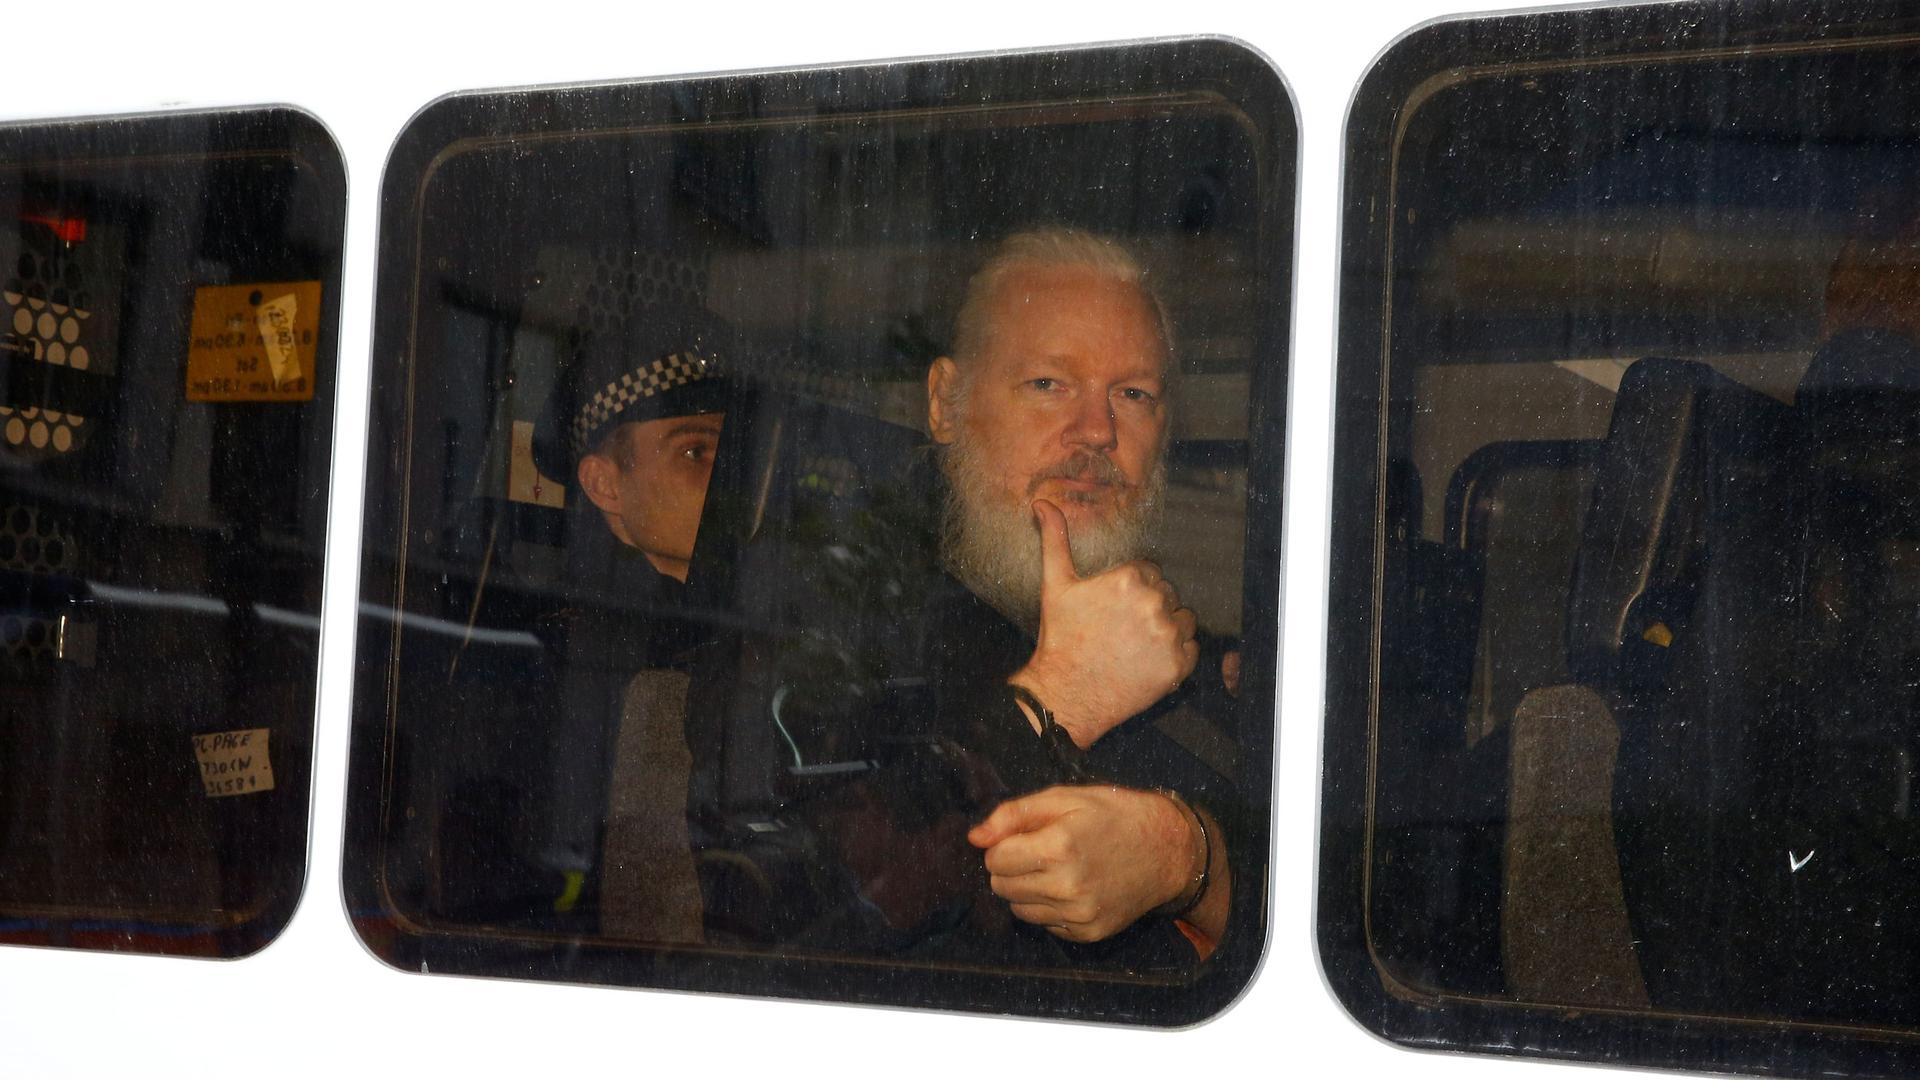 WikiLeaks founder Julian Assange is seen with a long white beard, sitting and handcuffed in a police van.